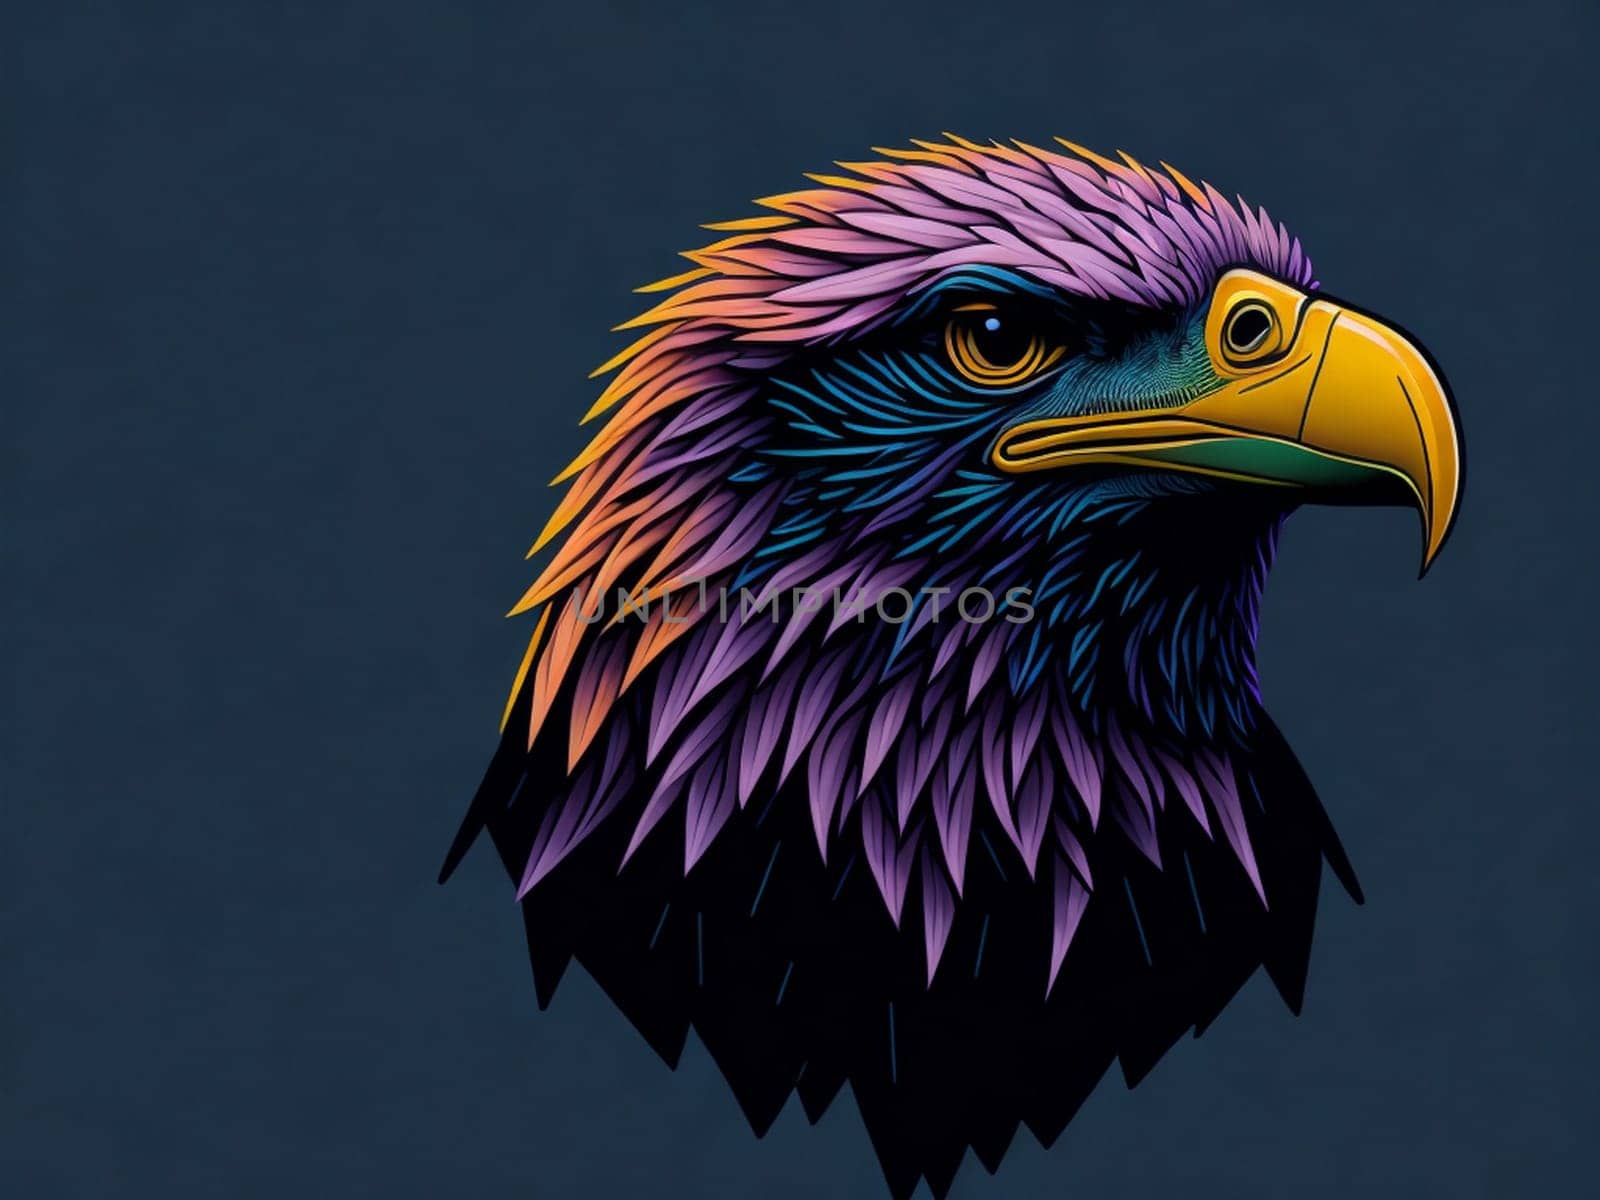 AI generate minimalistic portrait of an isolated head of a bald eagle on a dark background.